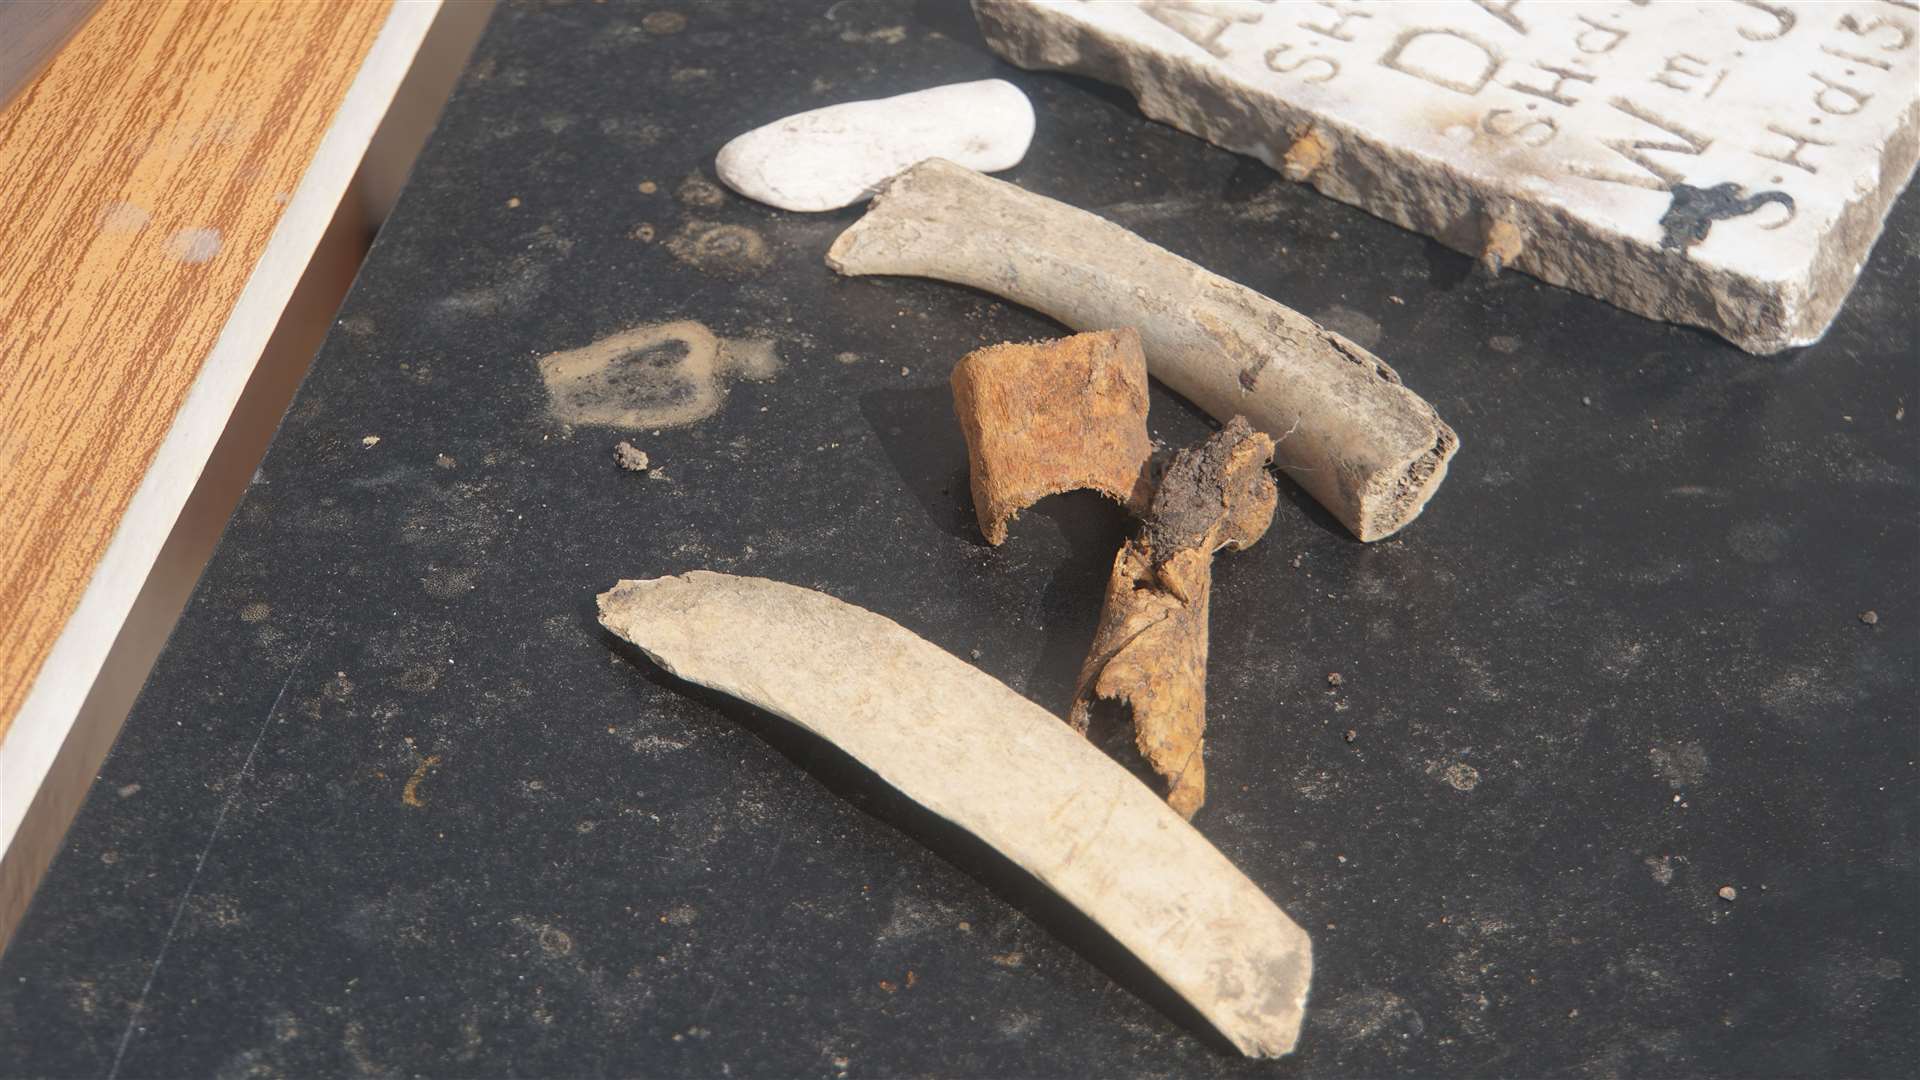 Some of the bone pieces found by the children.